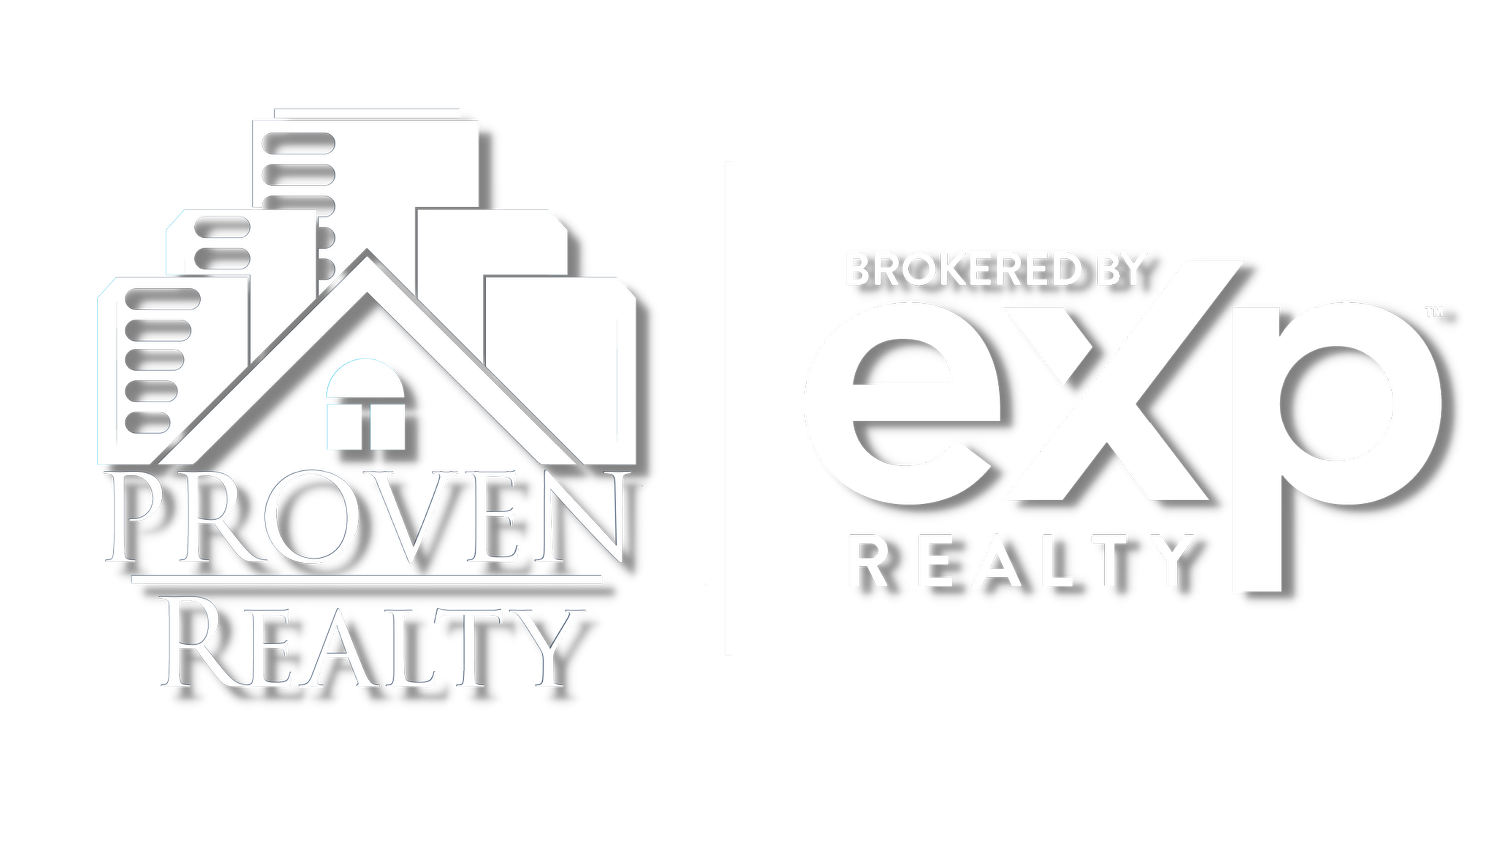 Proven Realty